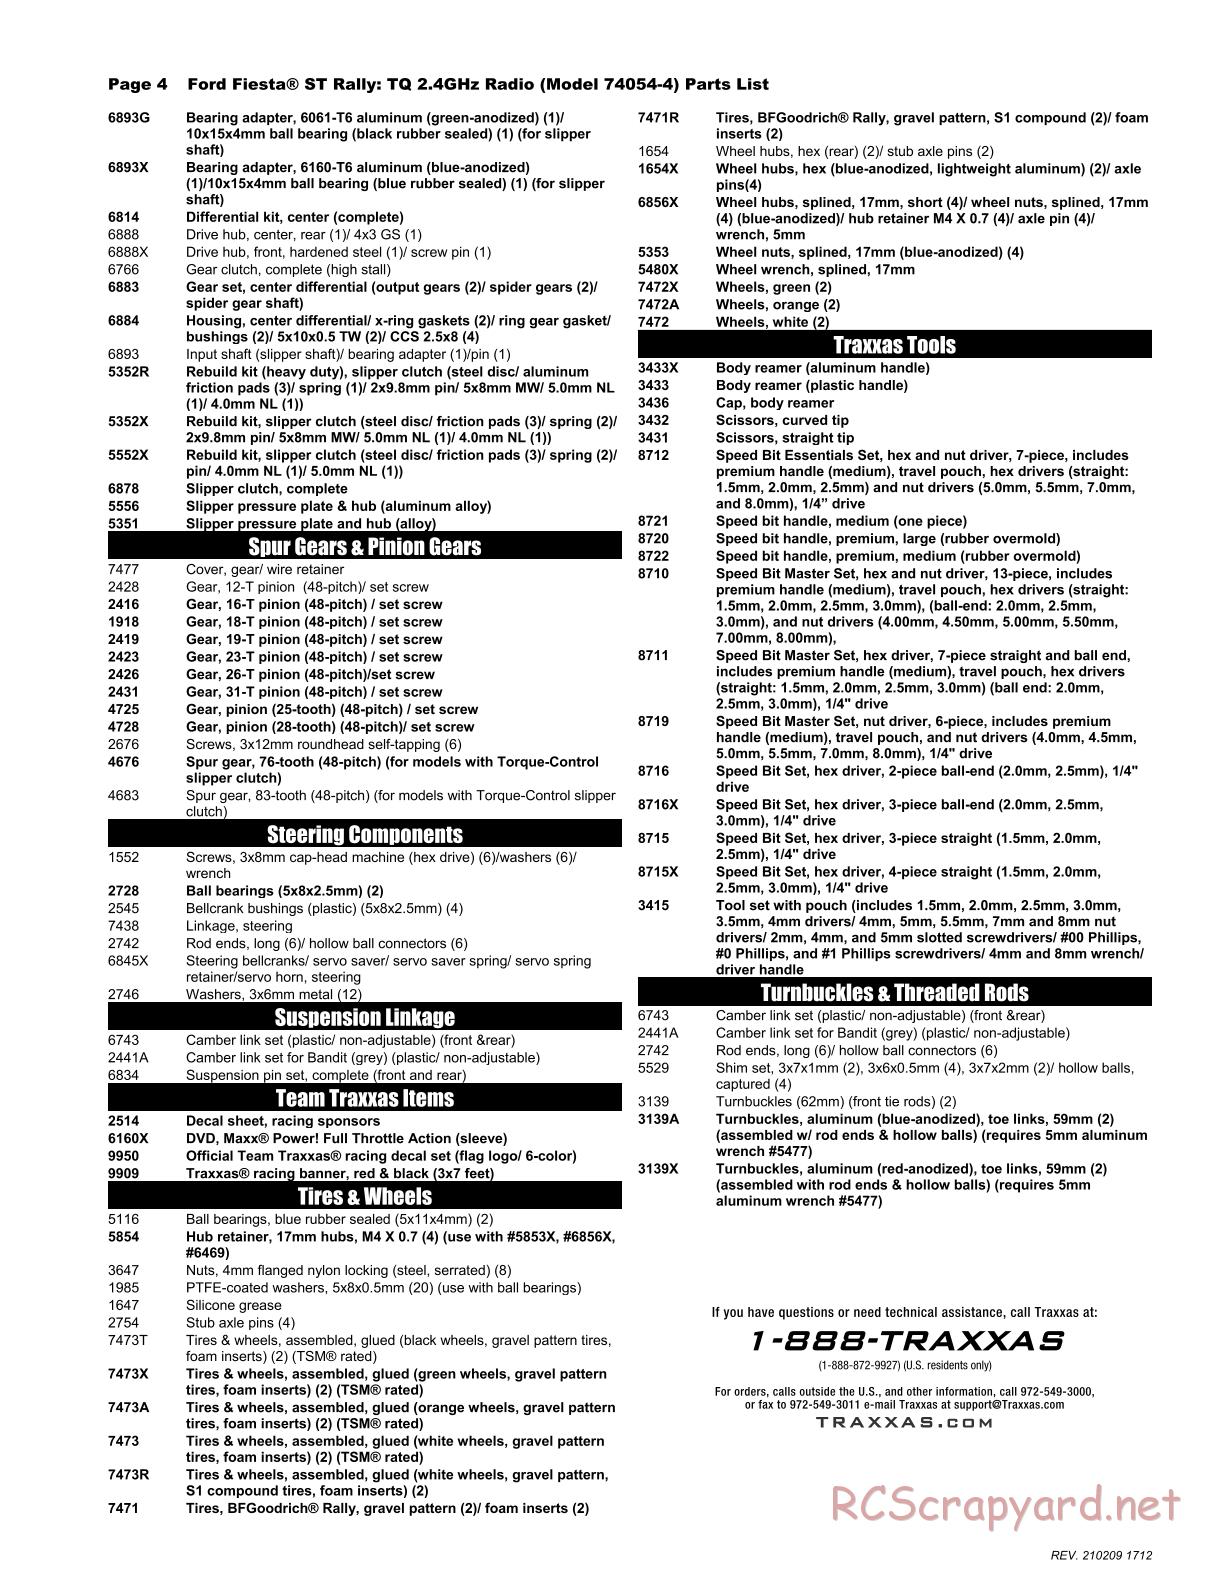 Traxxas - Ford Fiesta ST Rally - Parts List - Page 4